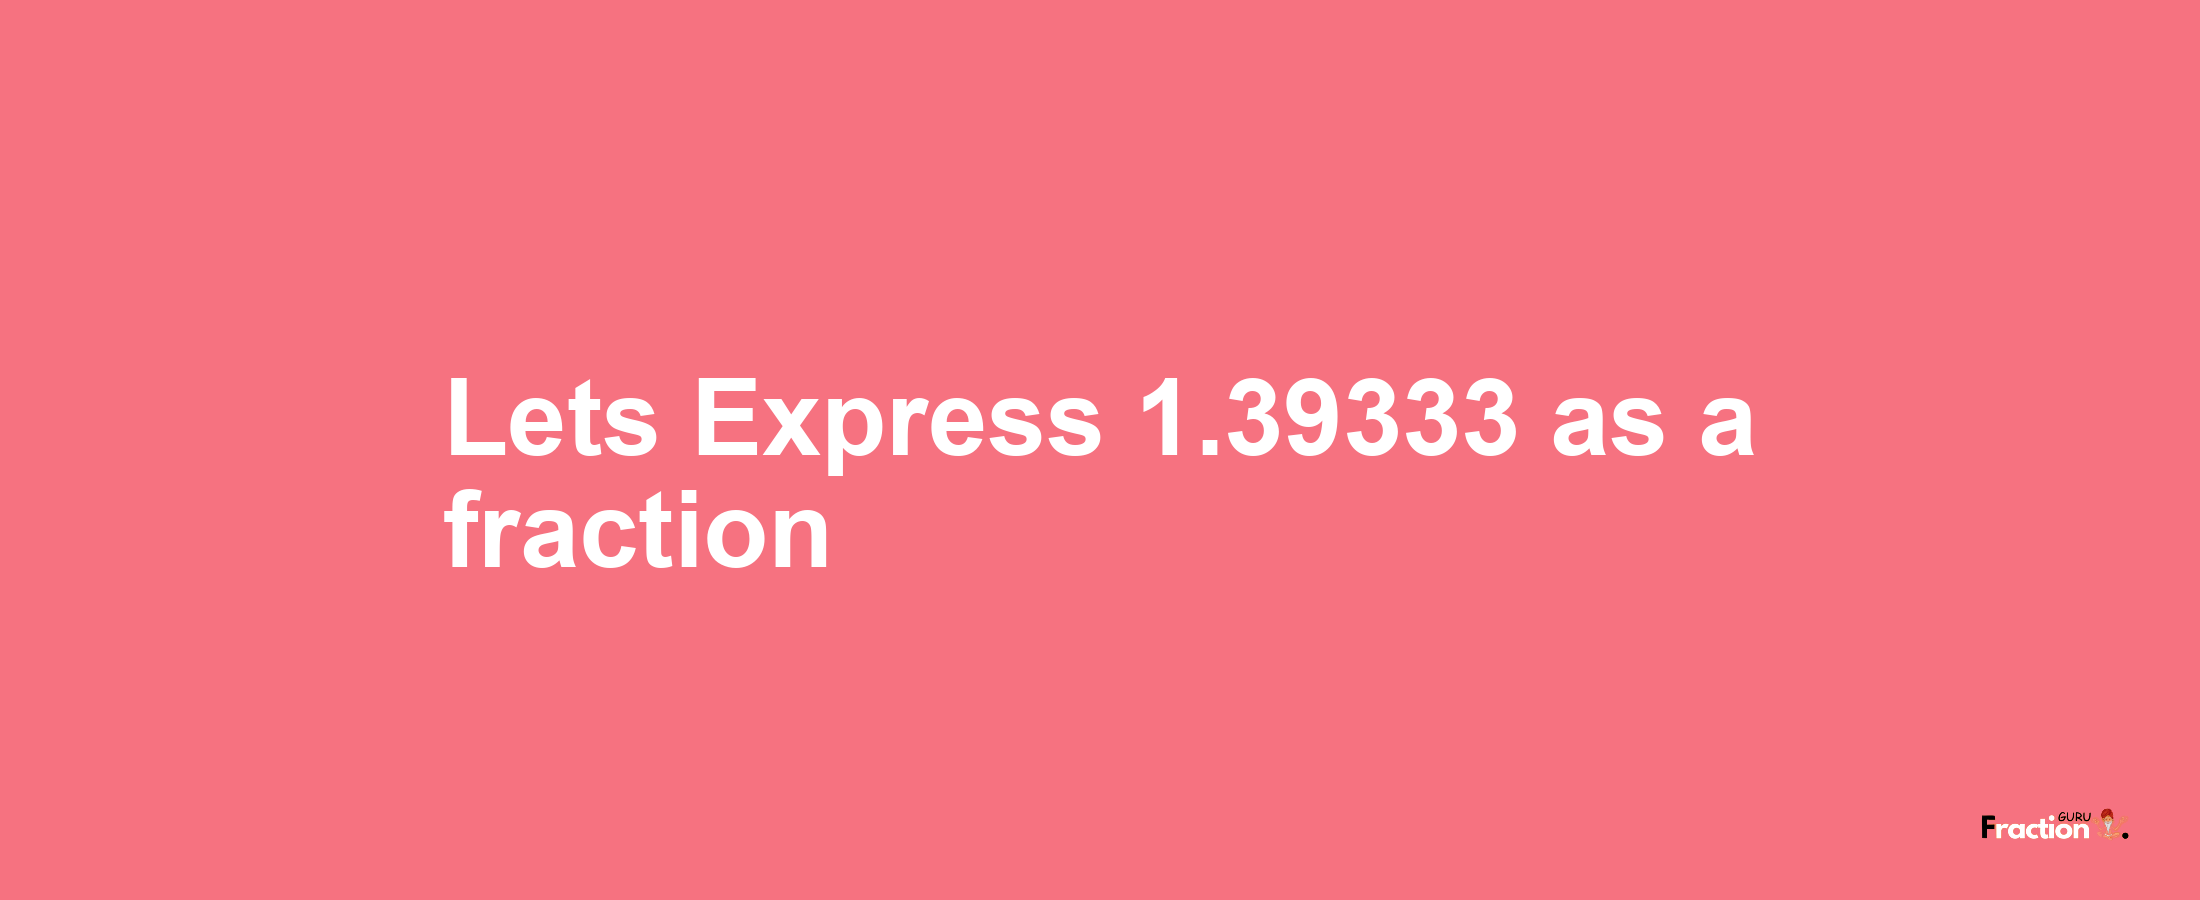 Lets Express 1.39333 as afraction